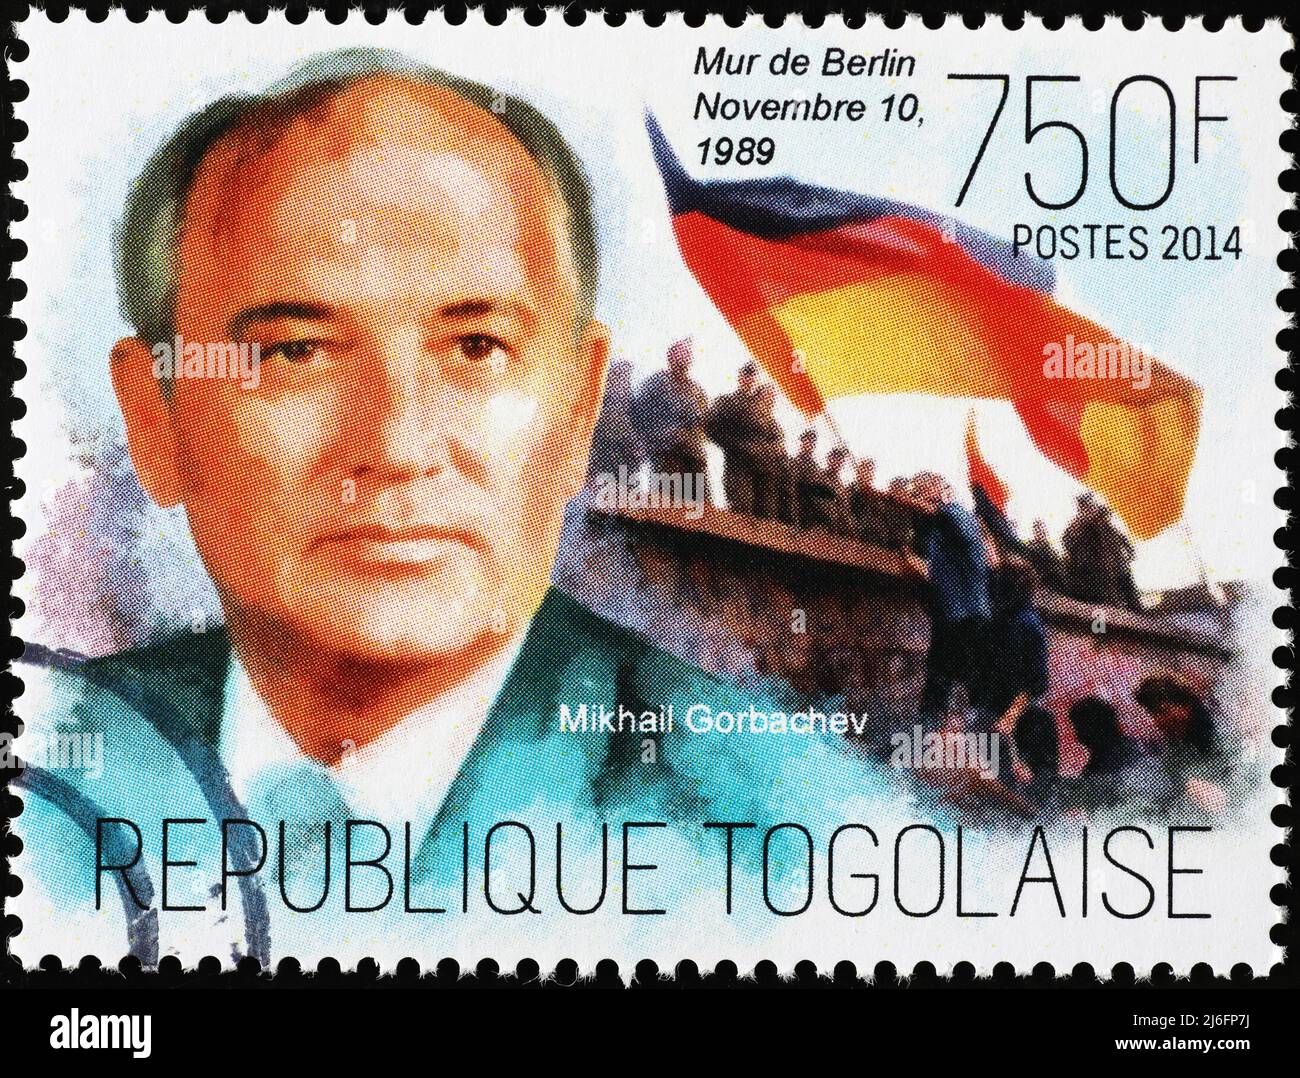 Mikhail Gorbachev and the wall of Berlin on postage stamp Stock Photo